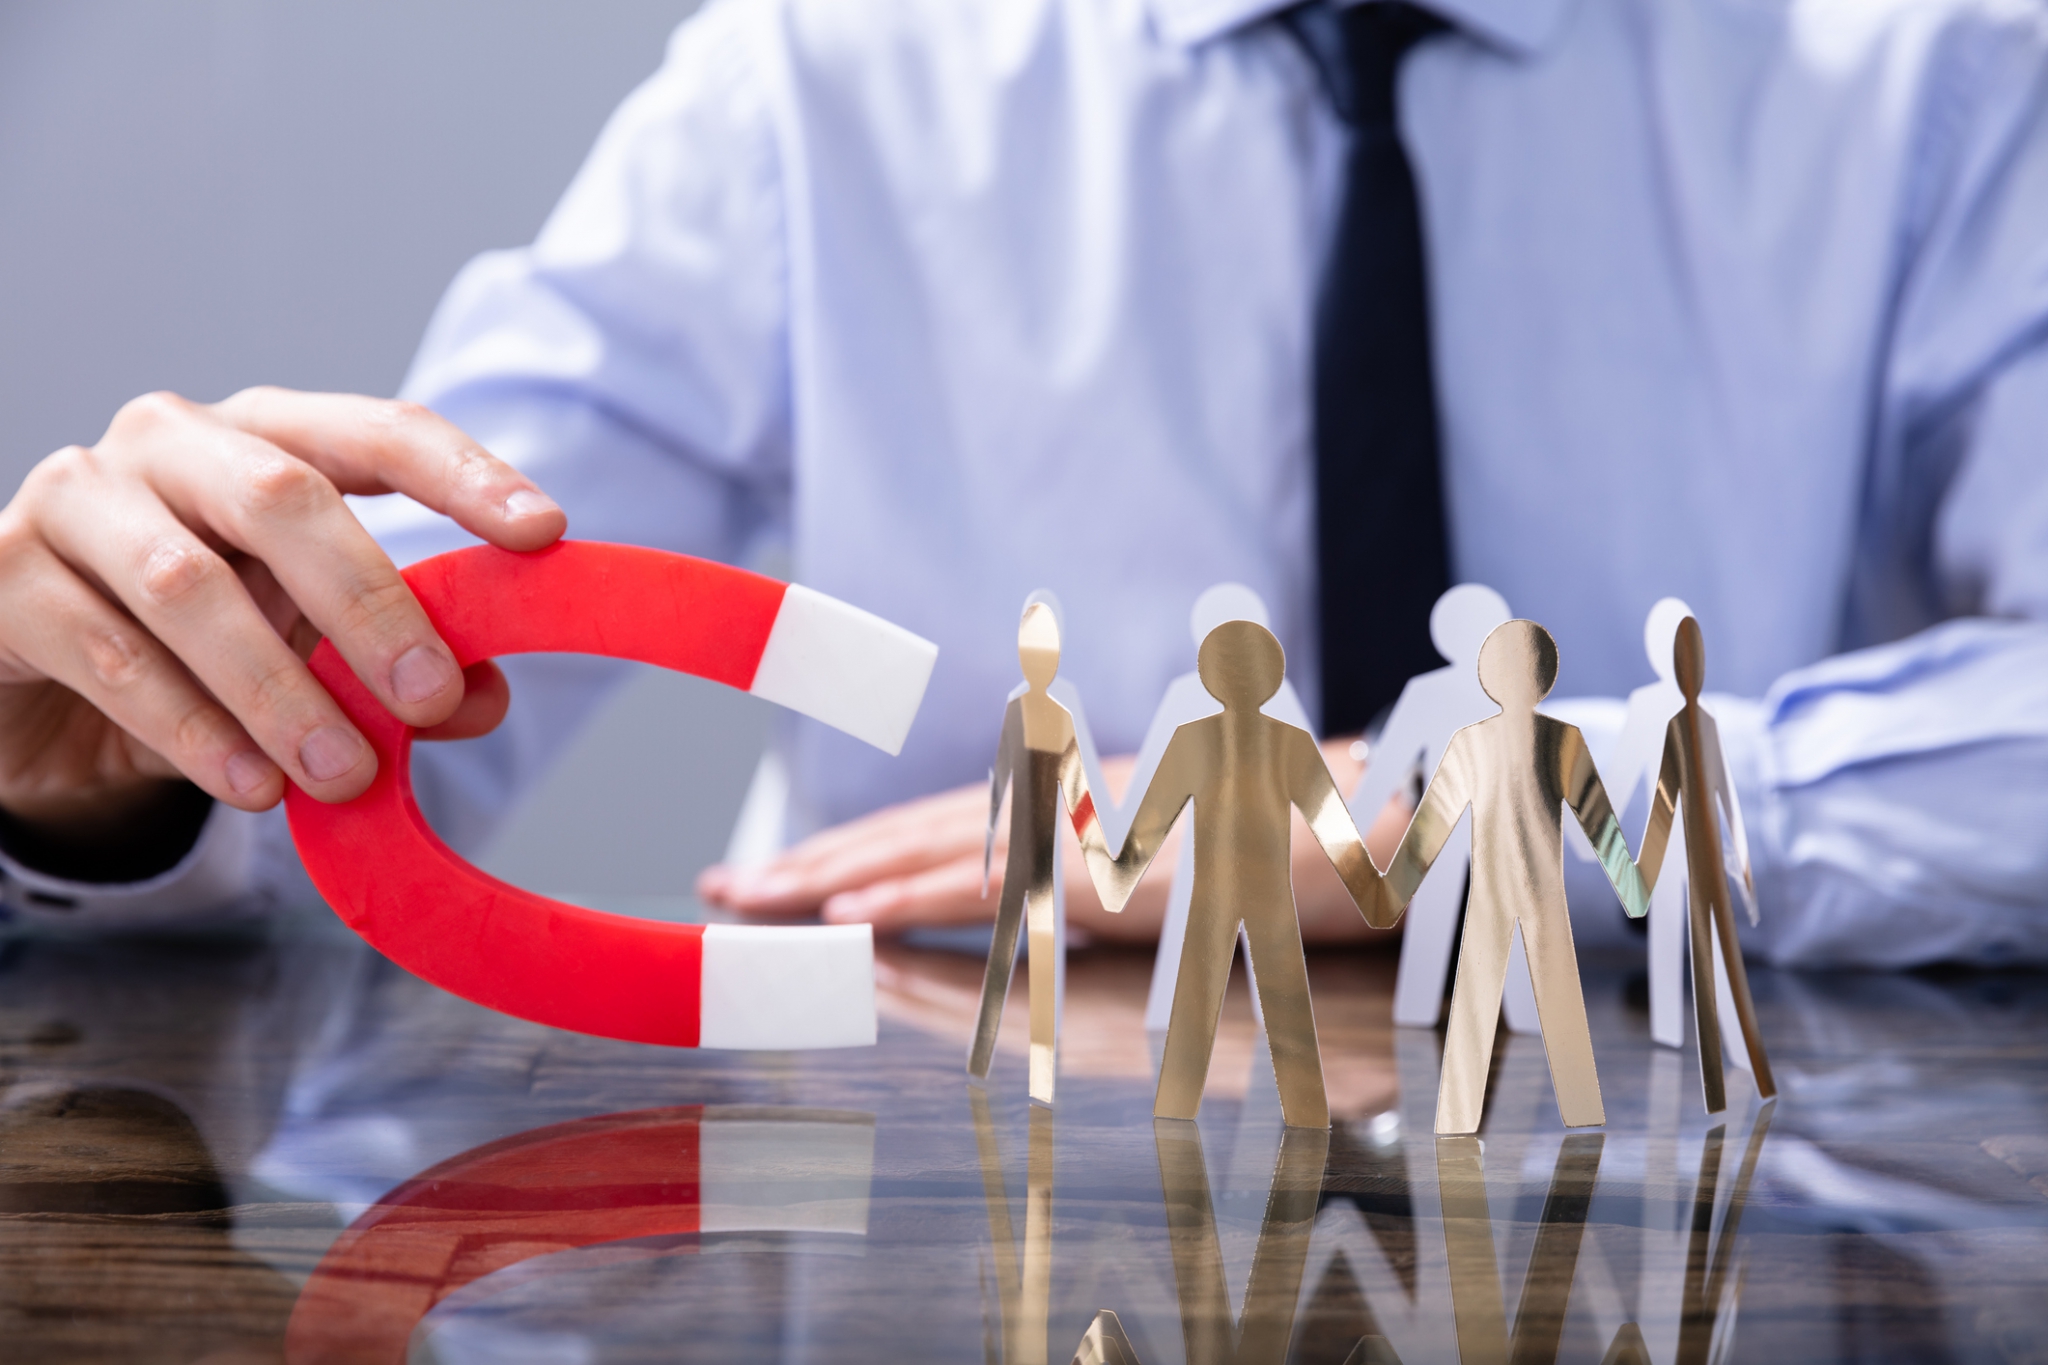 HR Grapevine: The importance of employee retention